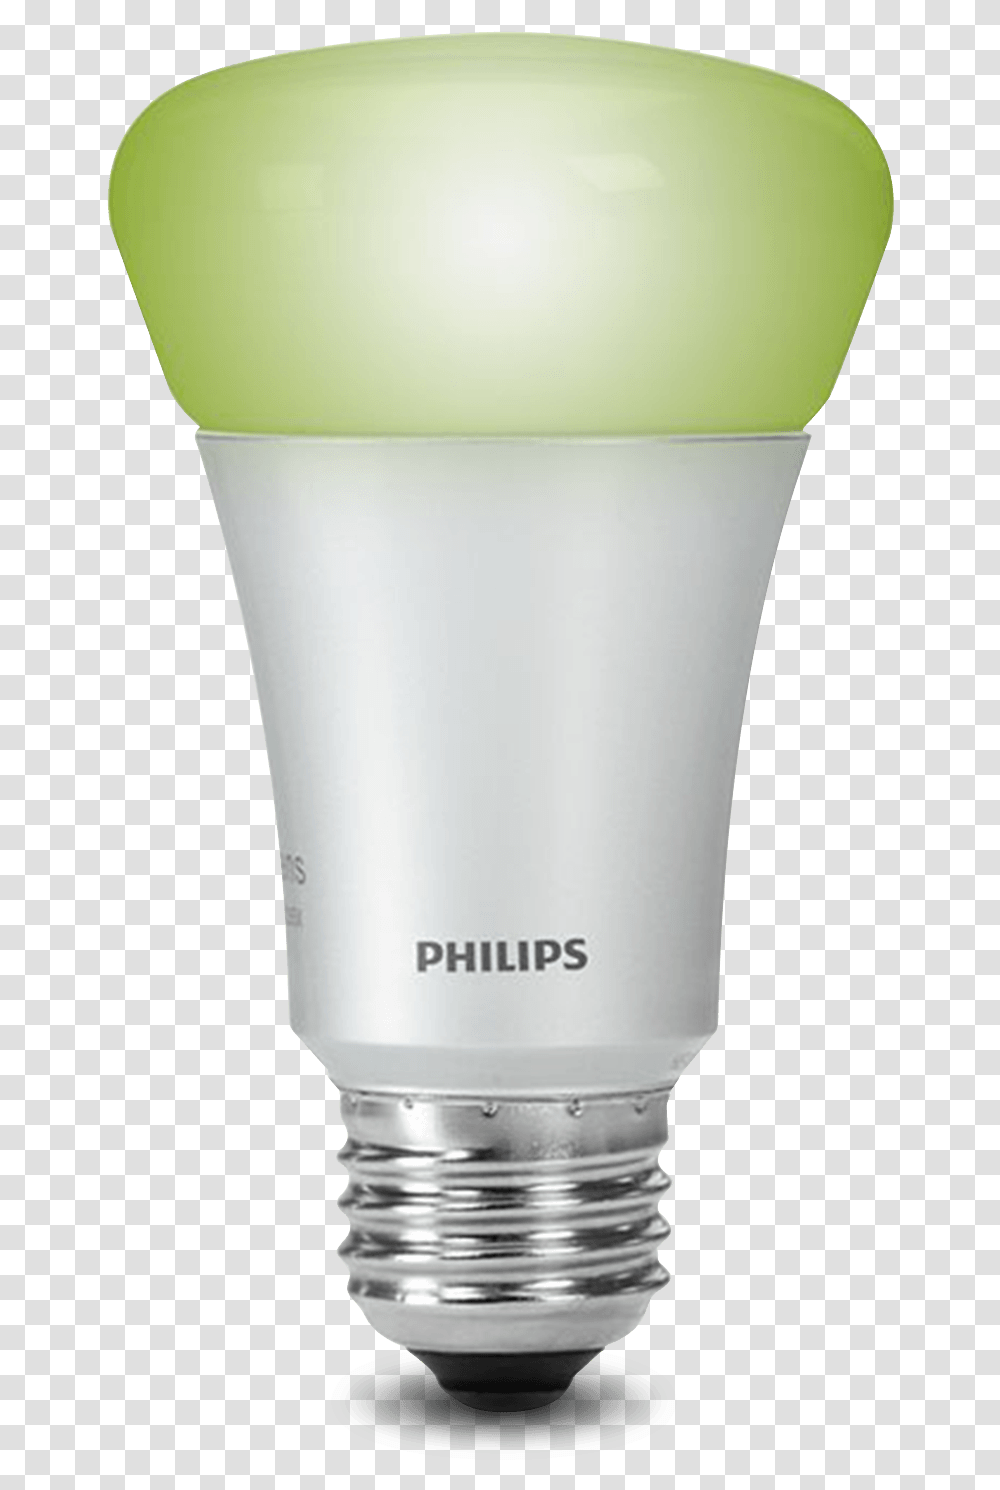 Philips Hue Philips Light Bulb, Lamp, Lightbulb, Cosmetics, Toothpaste Transparent Png